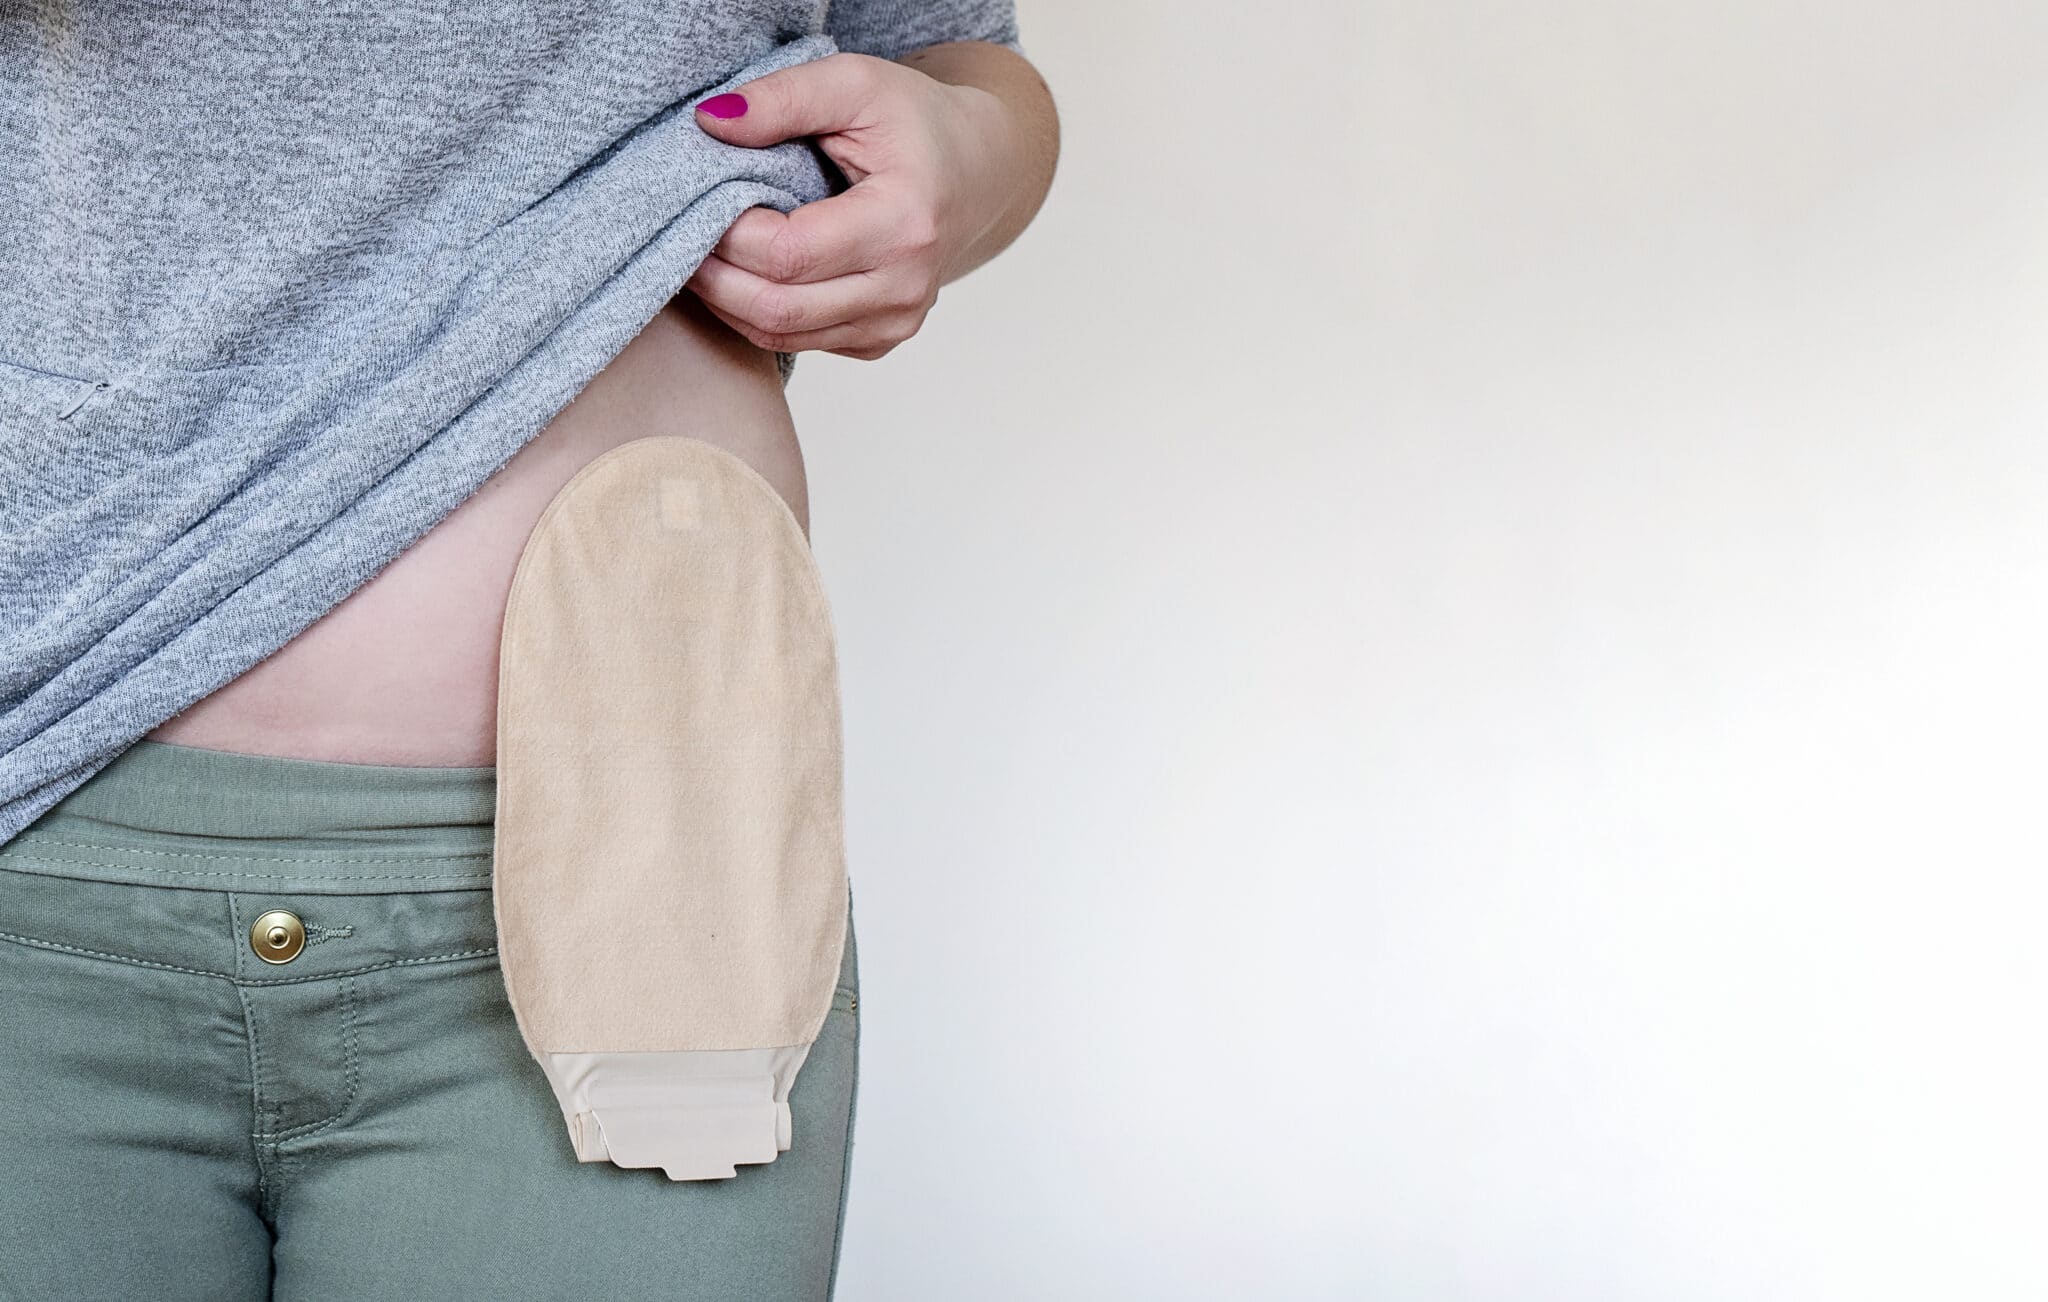 Facts About Living With an Ostomy